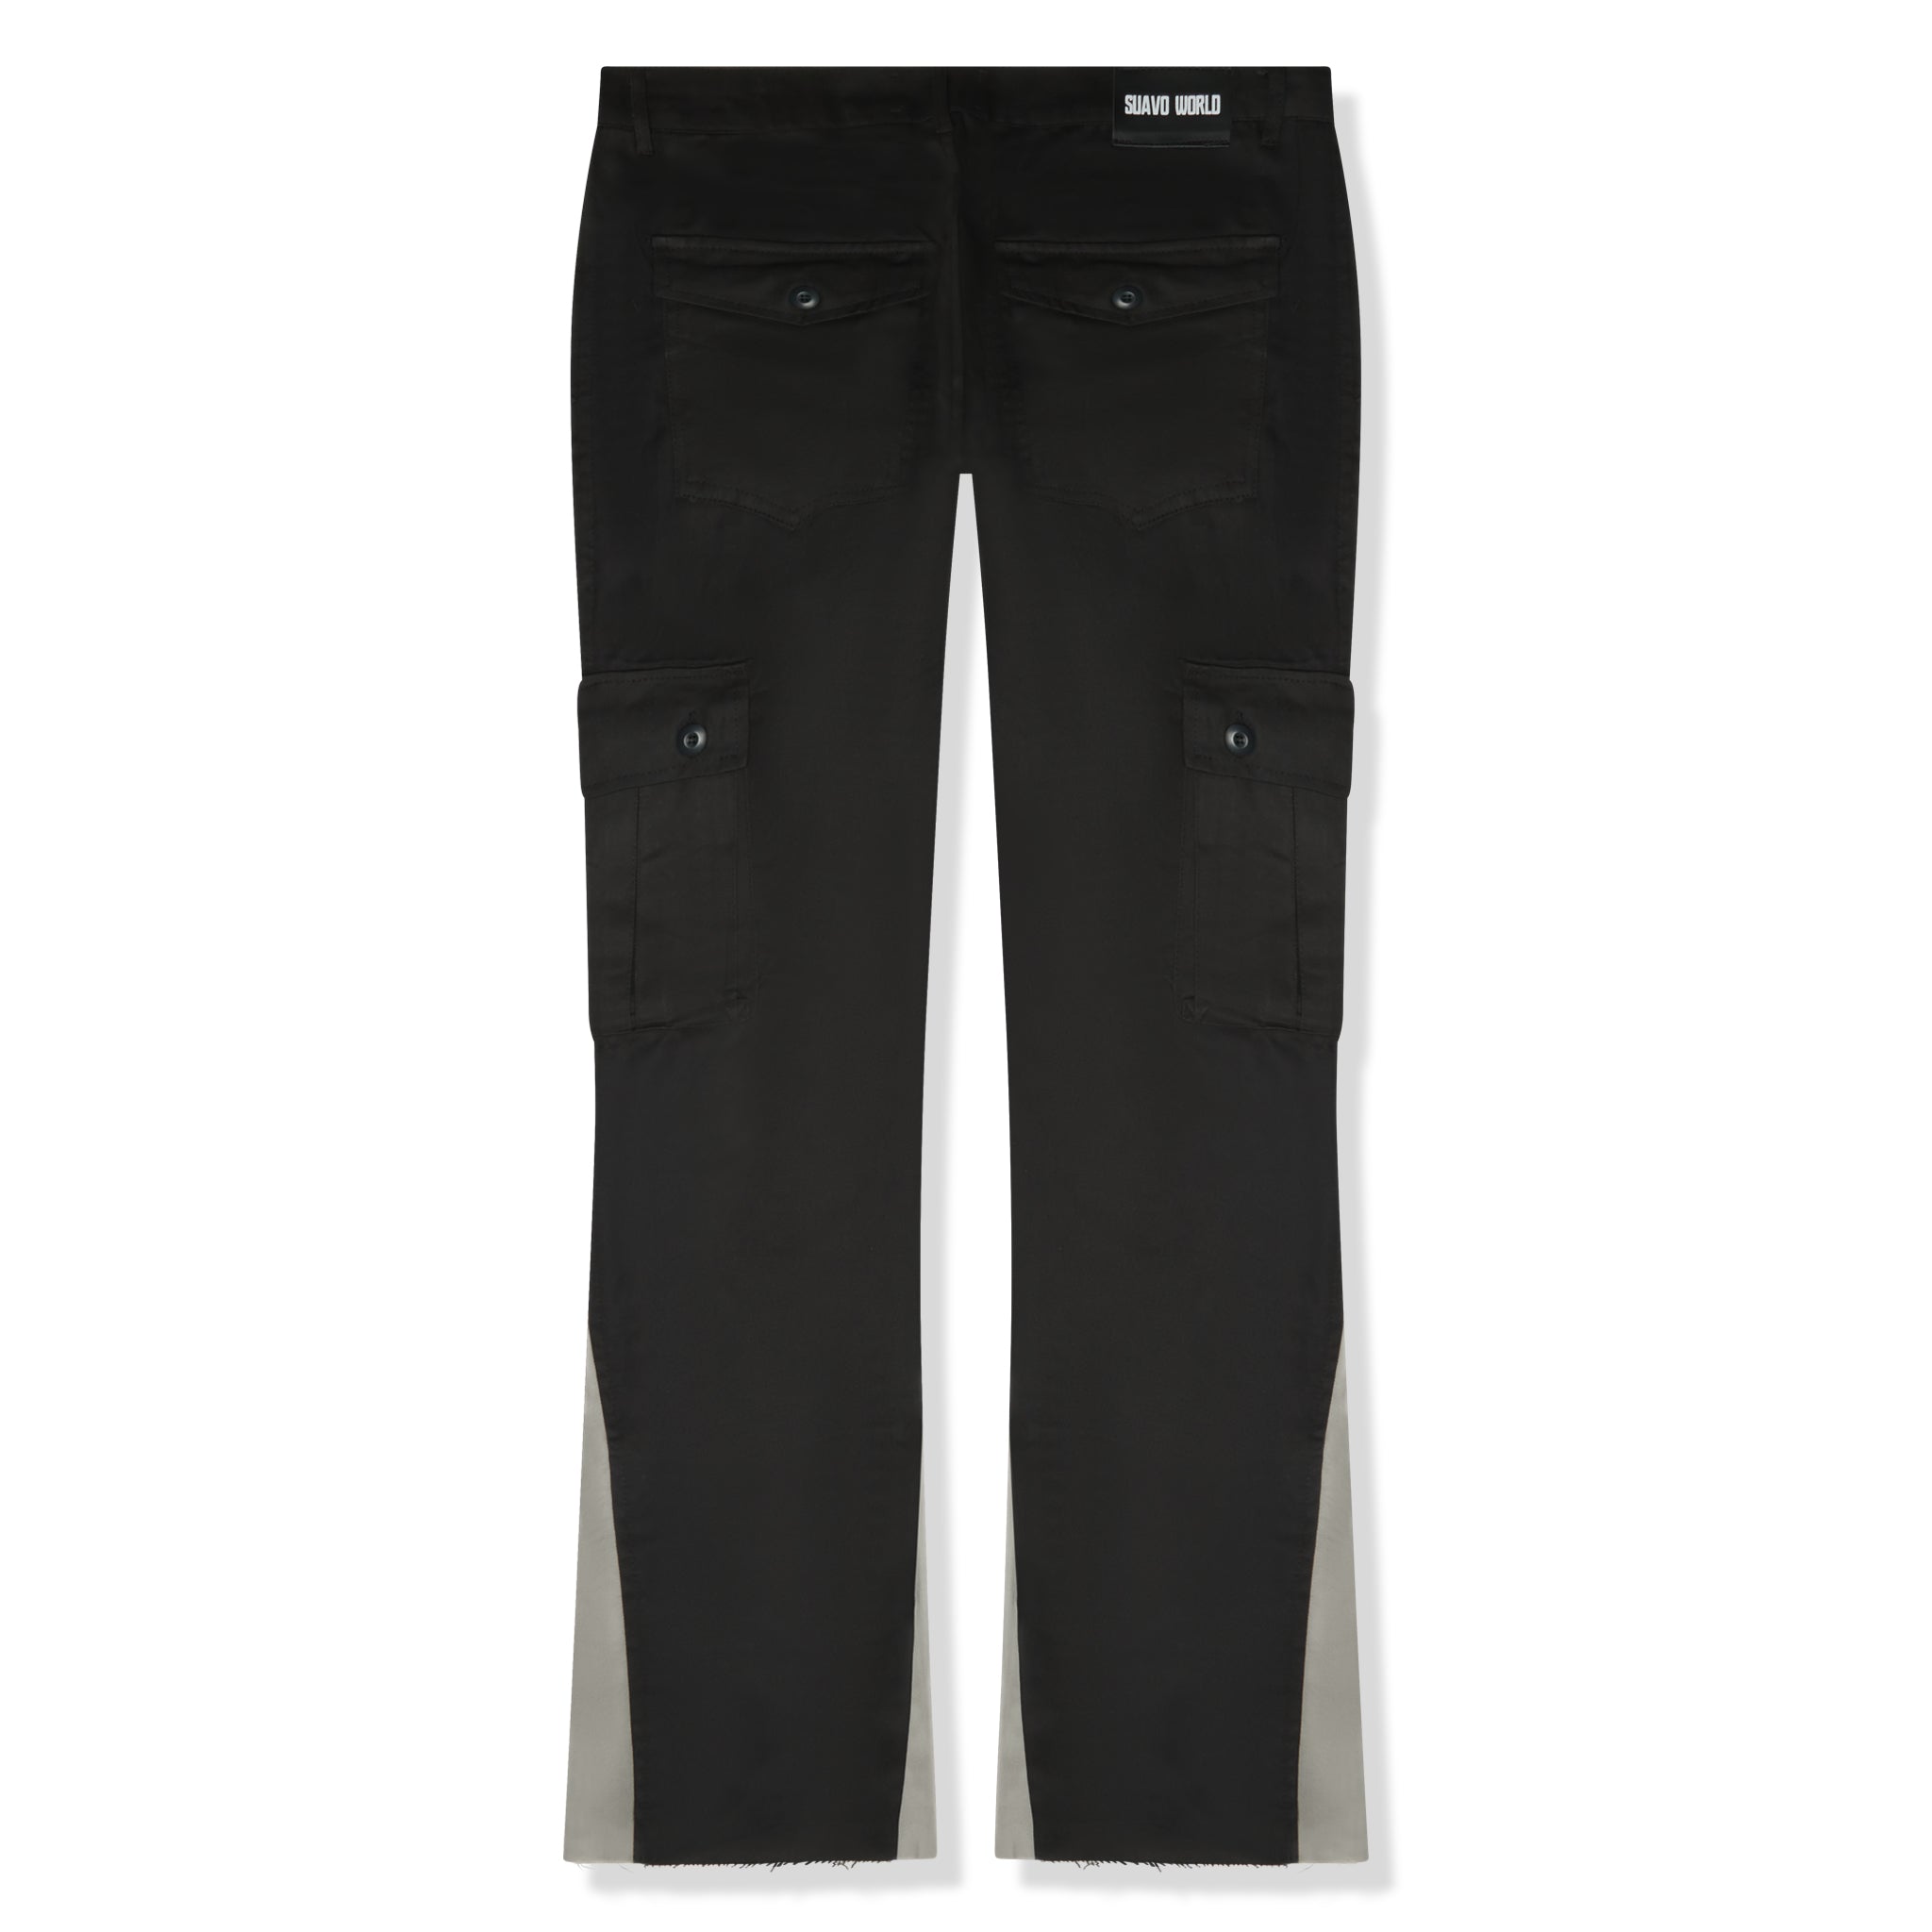 Back view of Suavo World Cargo Flare Trousers Black